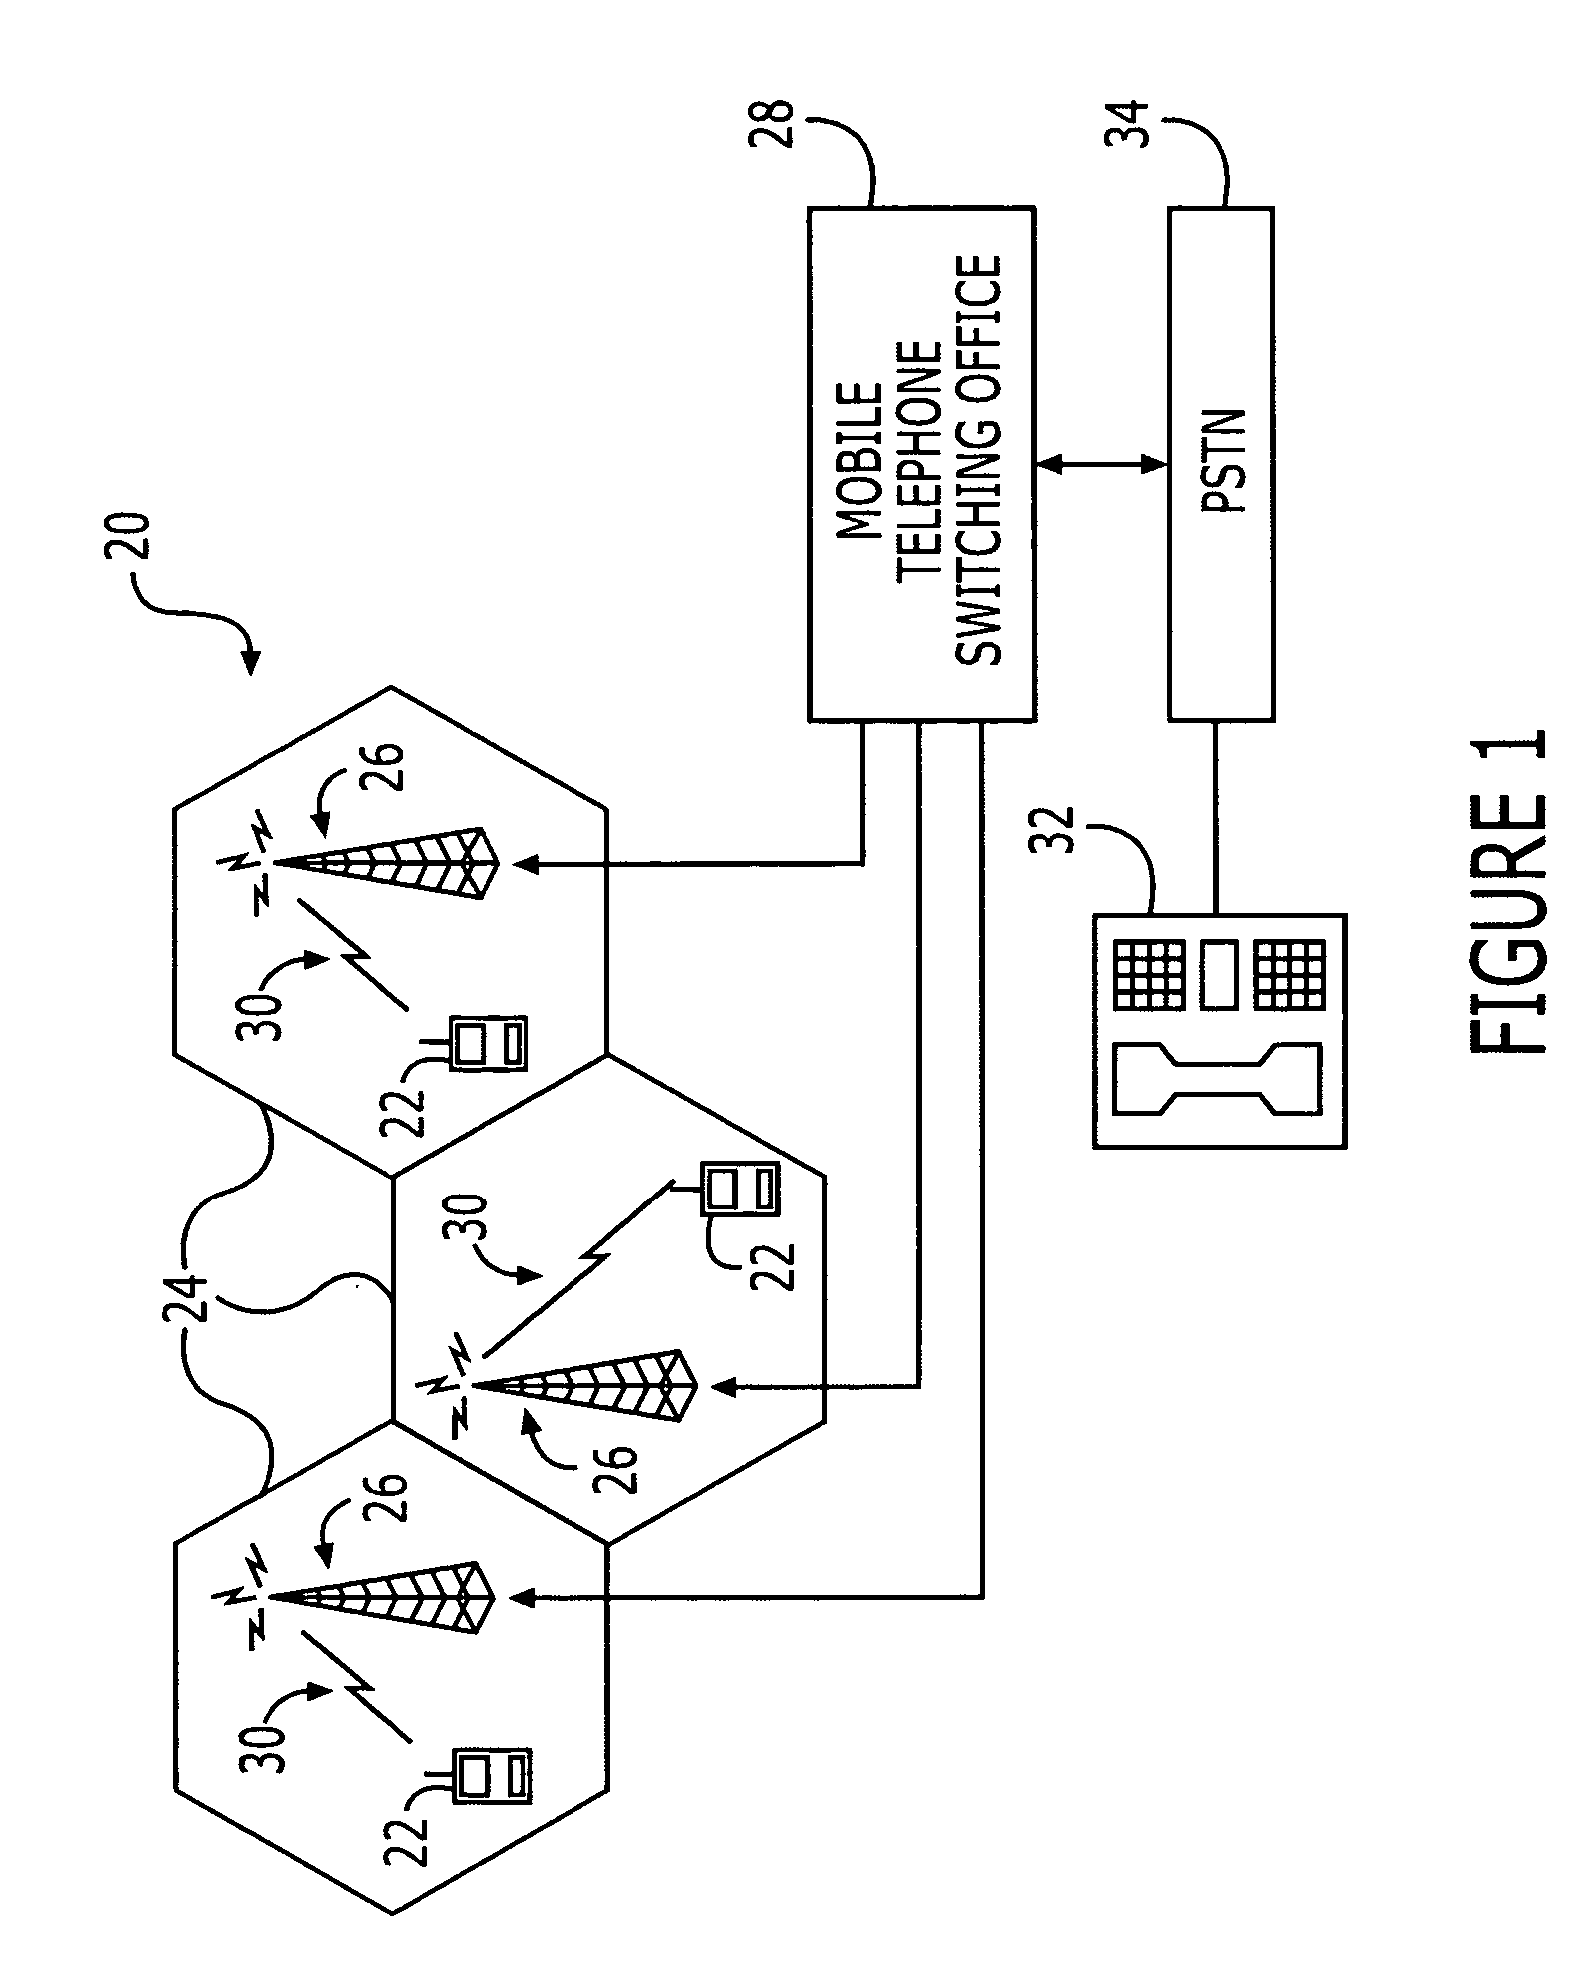 Cooperative global positioning system (GPS) processing by mobile terminals that communicate via an ad hoc wireless network